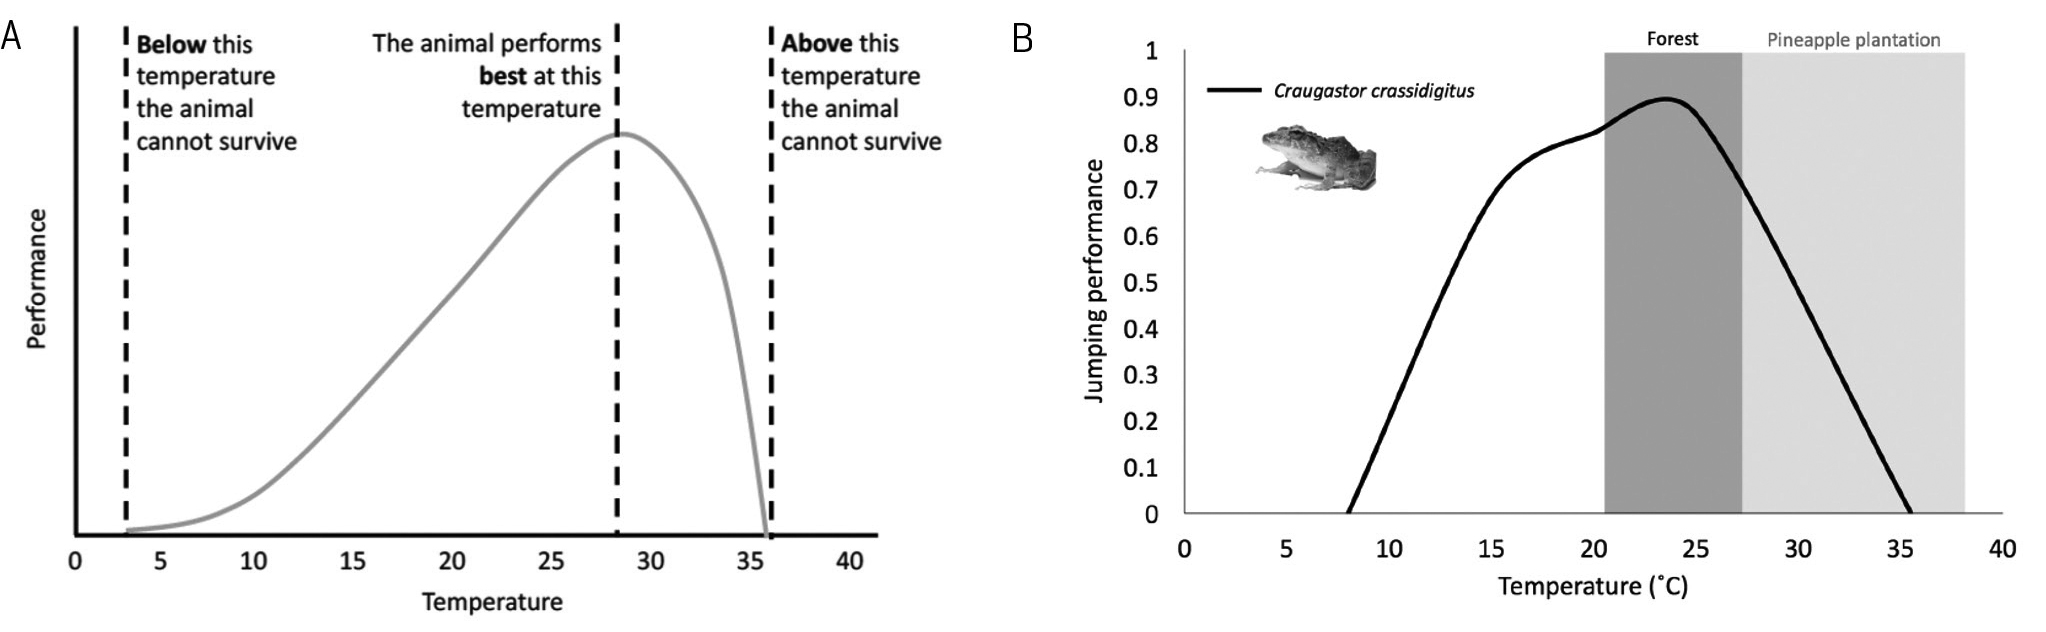 |	FIGURE 3: Performance curve (A) and graph displaying the performance of a specific frog species with the temperature of different habitats shaded to infer where that frog may thrive (B). 